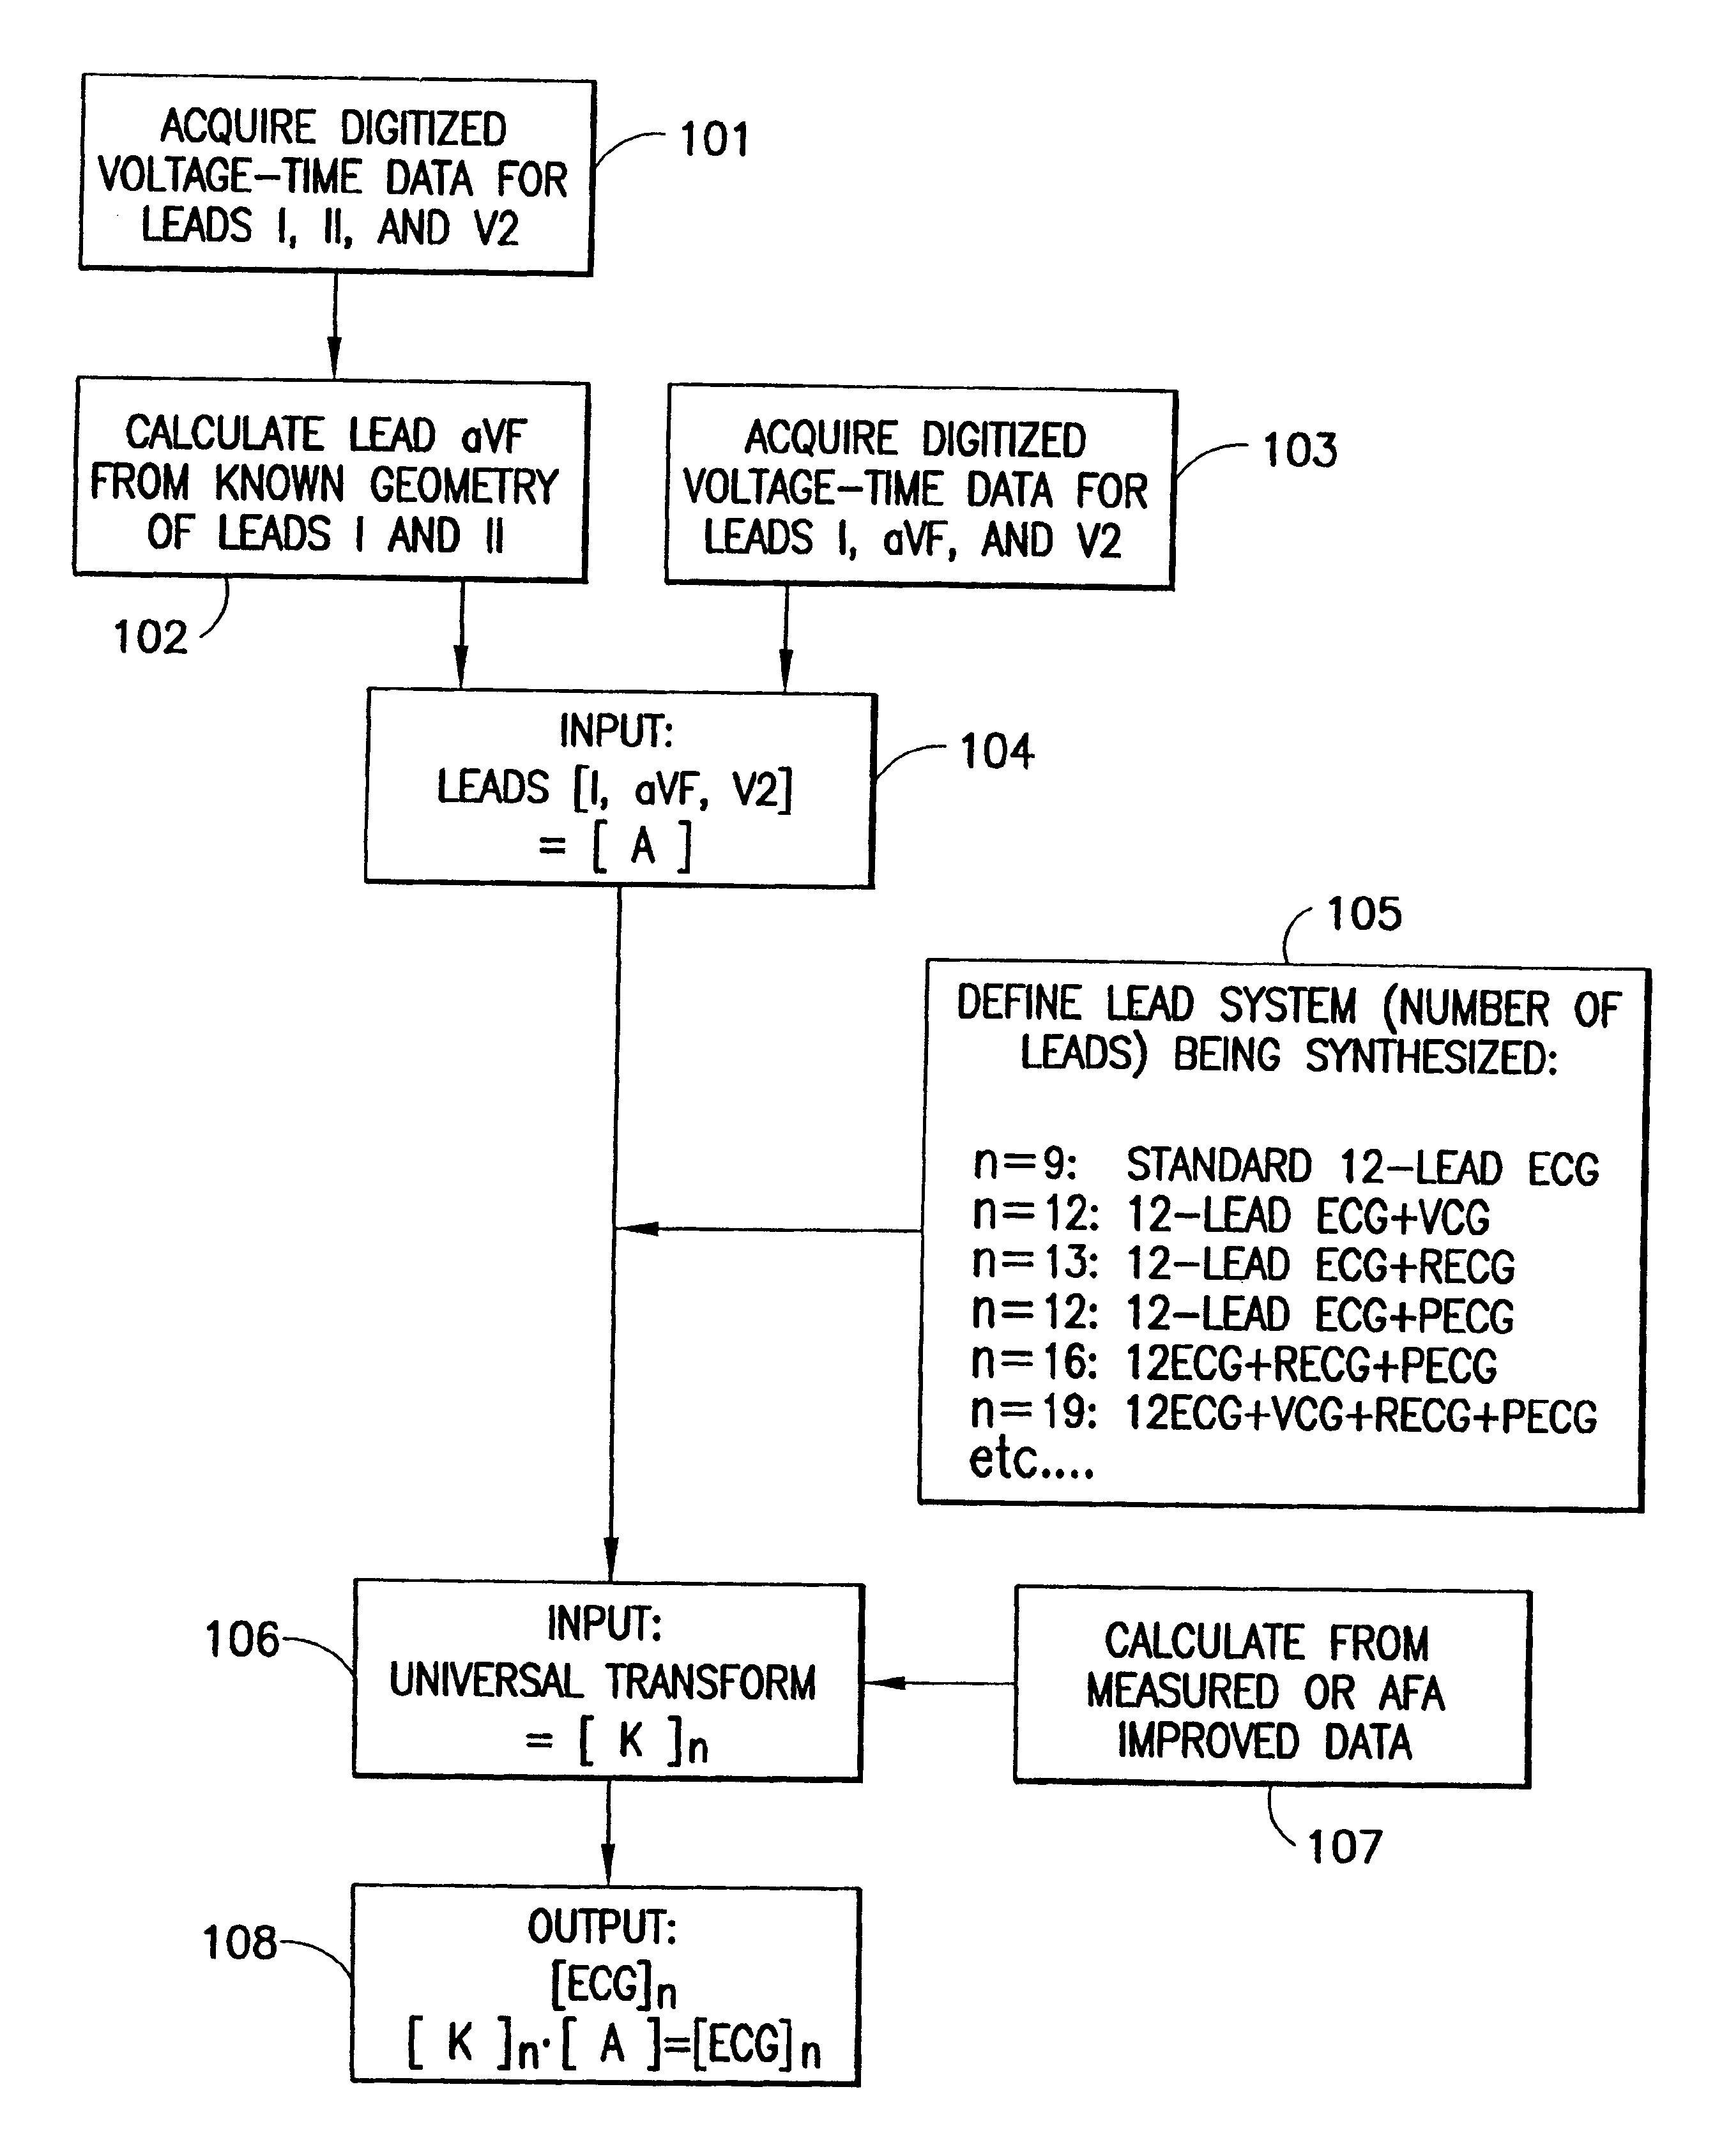 System and method for synthesizing leads of an electrocardiogram